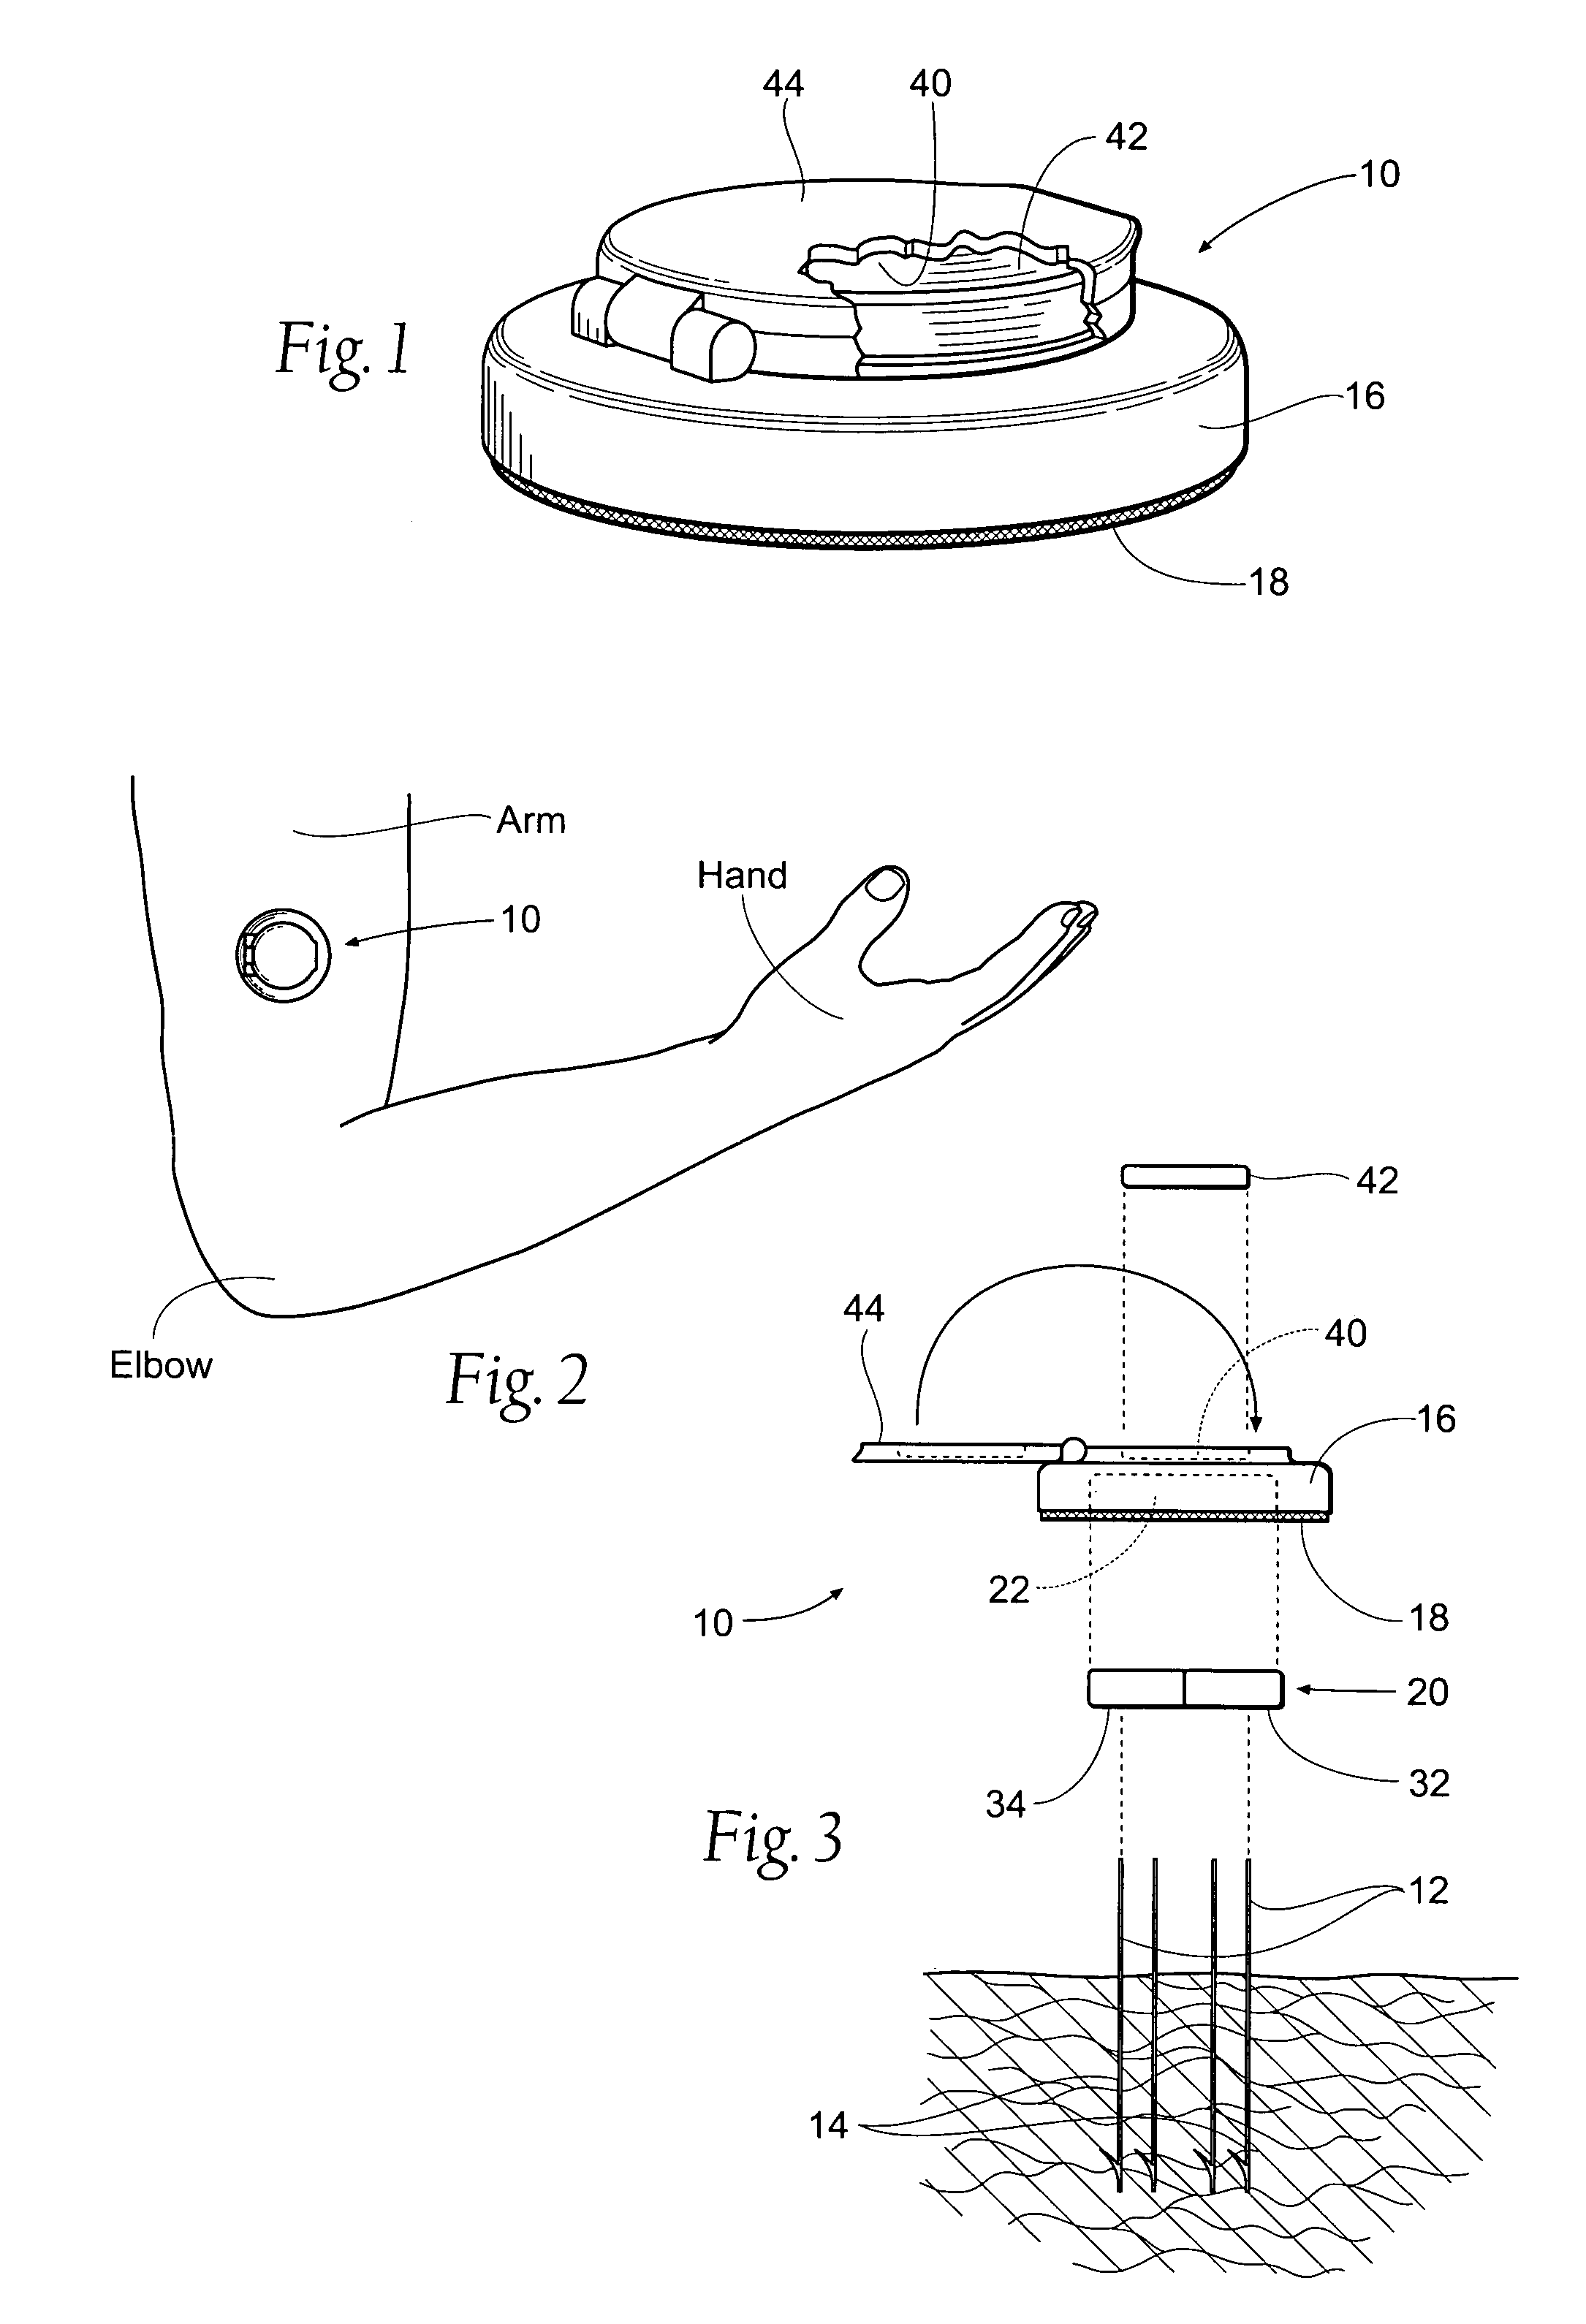 Portable percutaneous assemblies, systems and methods for providing highly selective functional or therapeutic neuromuscular stimulation